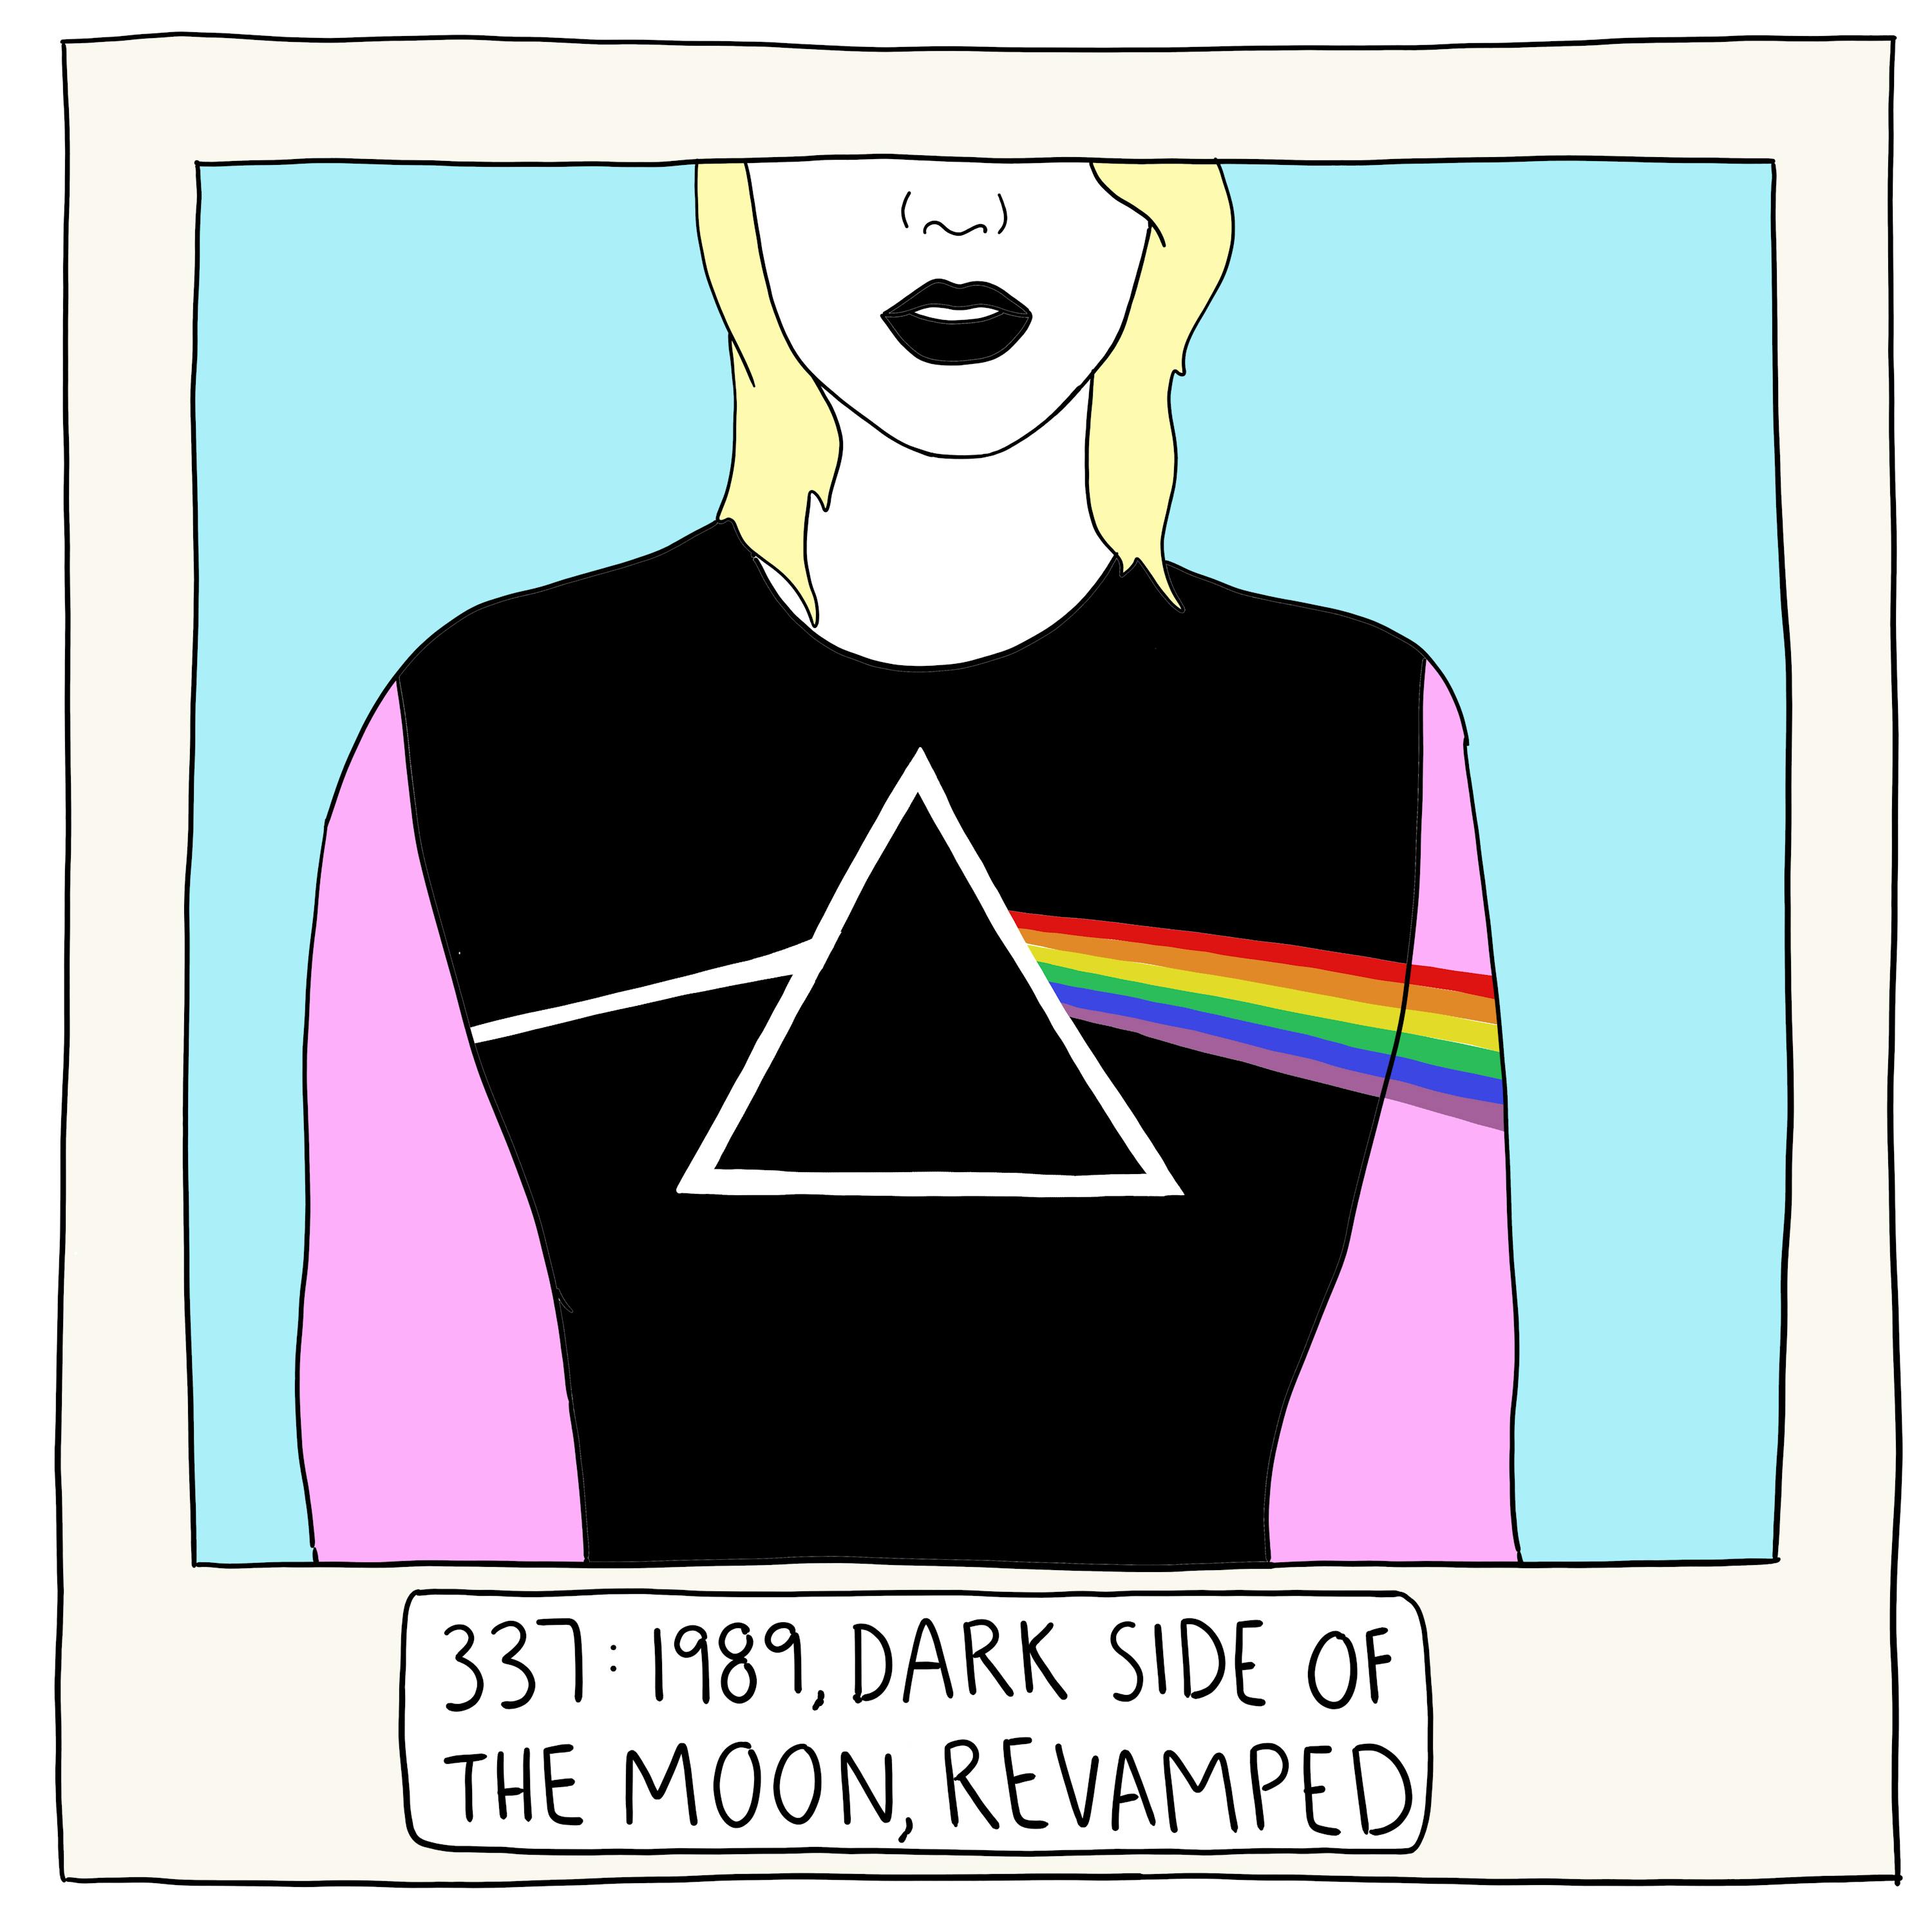 Rerecording Taylor Swift's 1989, Dark Side of the Moon, and Demi Lovato